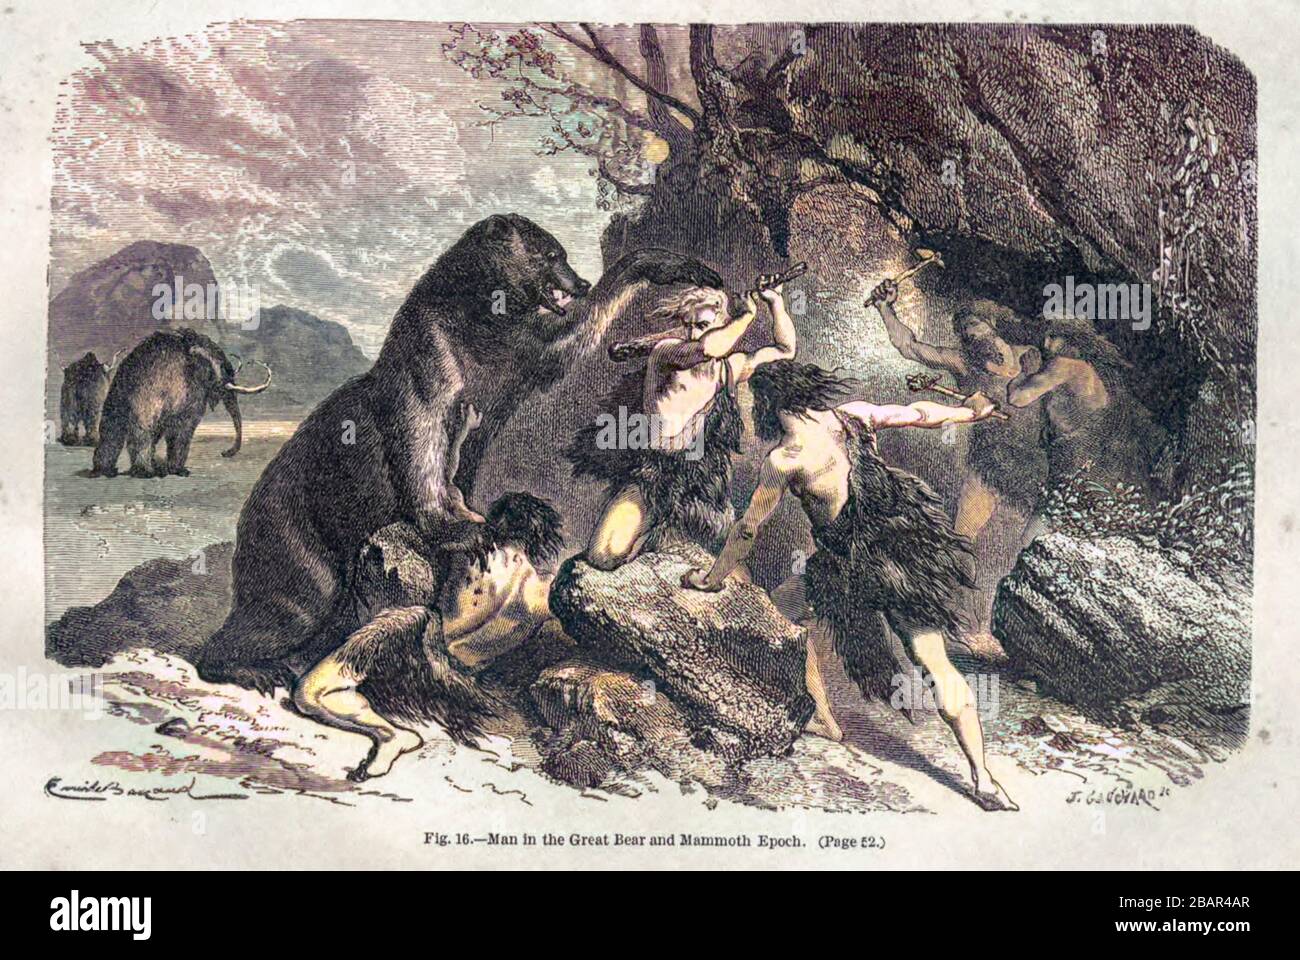 Machine colorized image of Great Bear and mammoth epoch, according to the French illustrator Emile Bayard (1837-1891), illustration Artwork published in Primitive Man by Louis Figuier (1819-1894), Published in London by Chapman and Hall 193 Piccadilly in 1870 Stock Photo